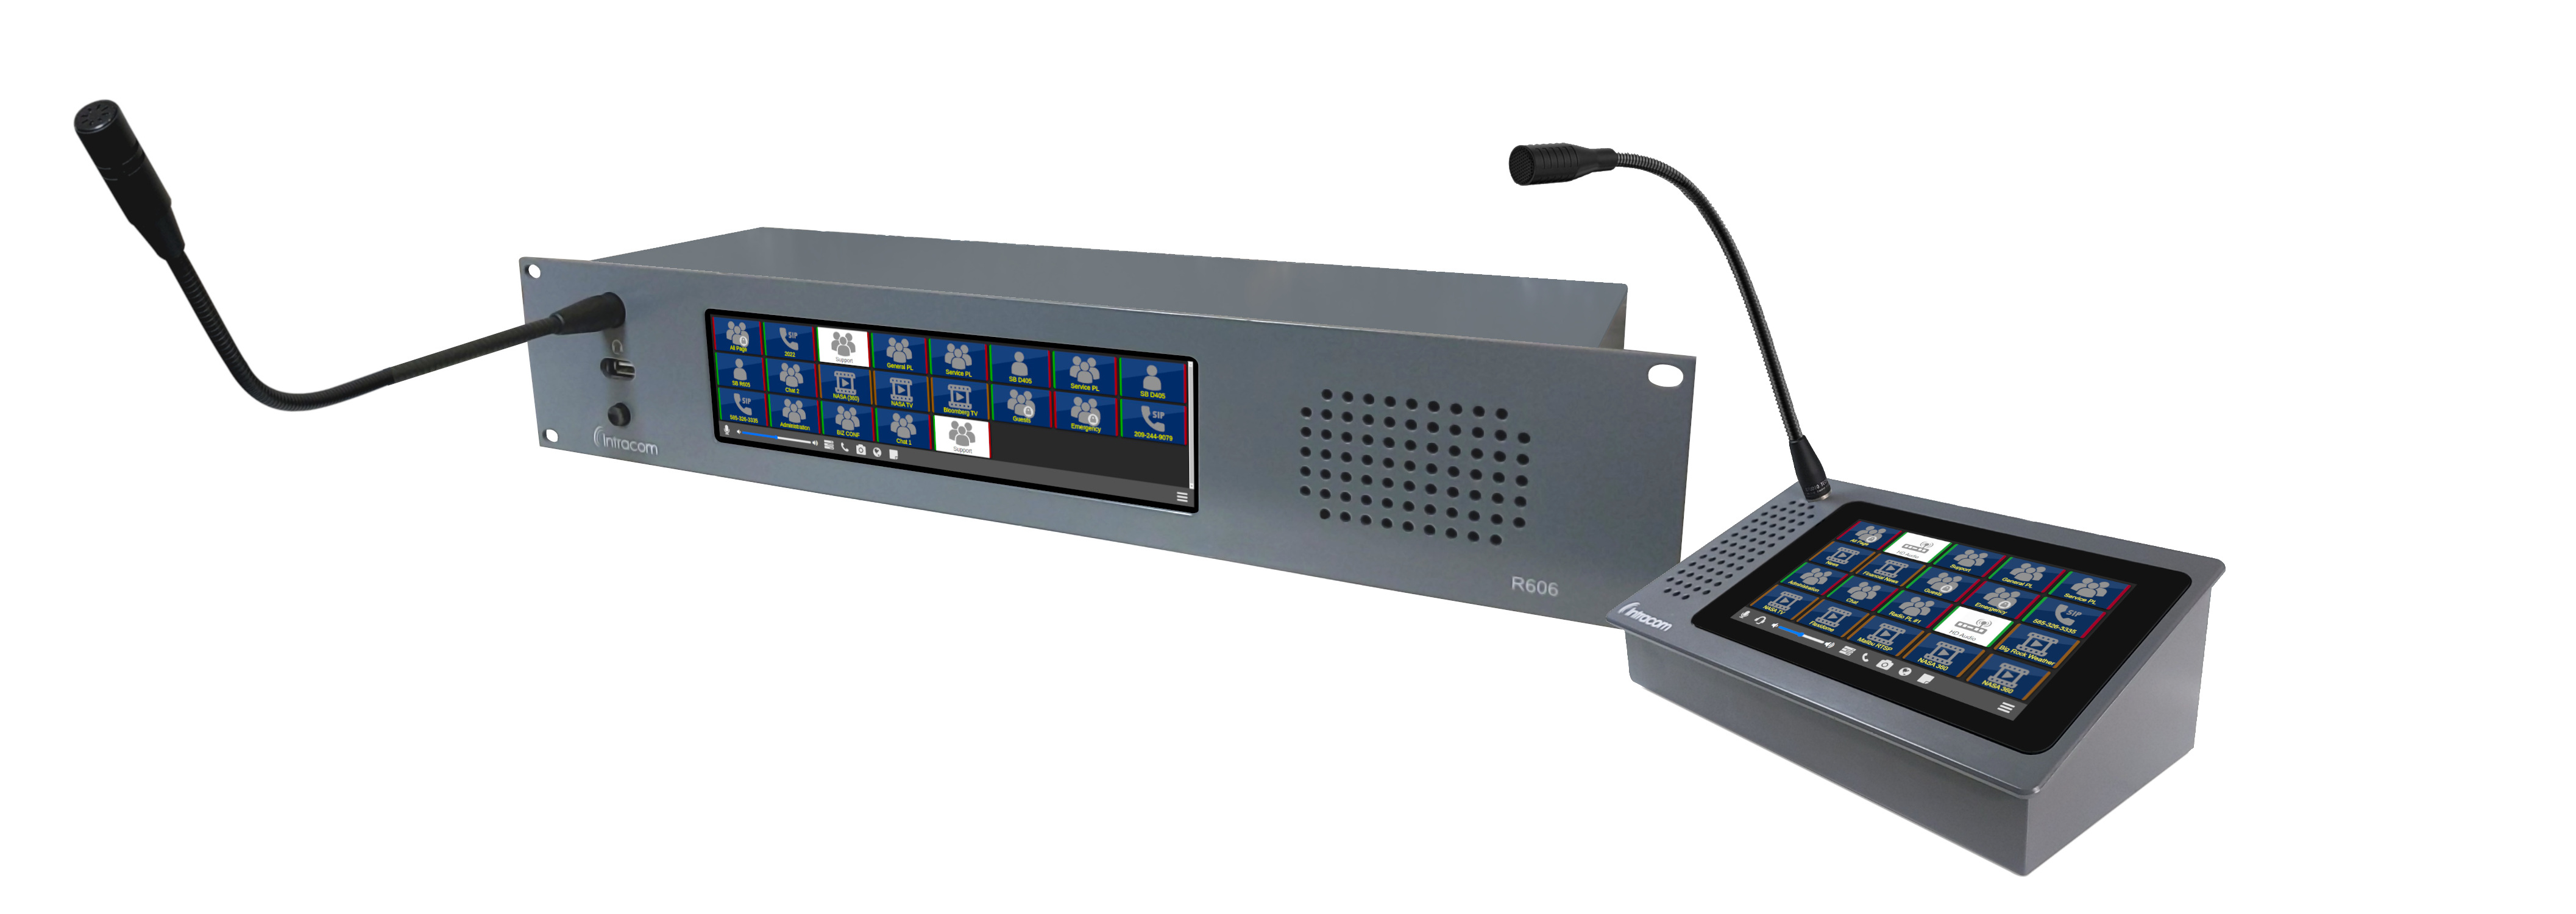 vcom hardware control panels with touchscreen and gooseneck microphone